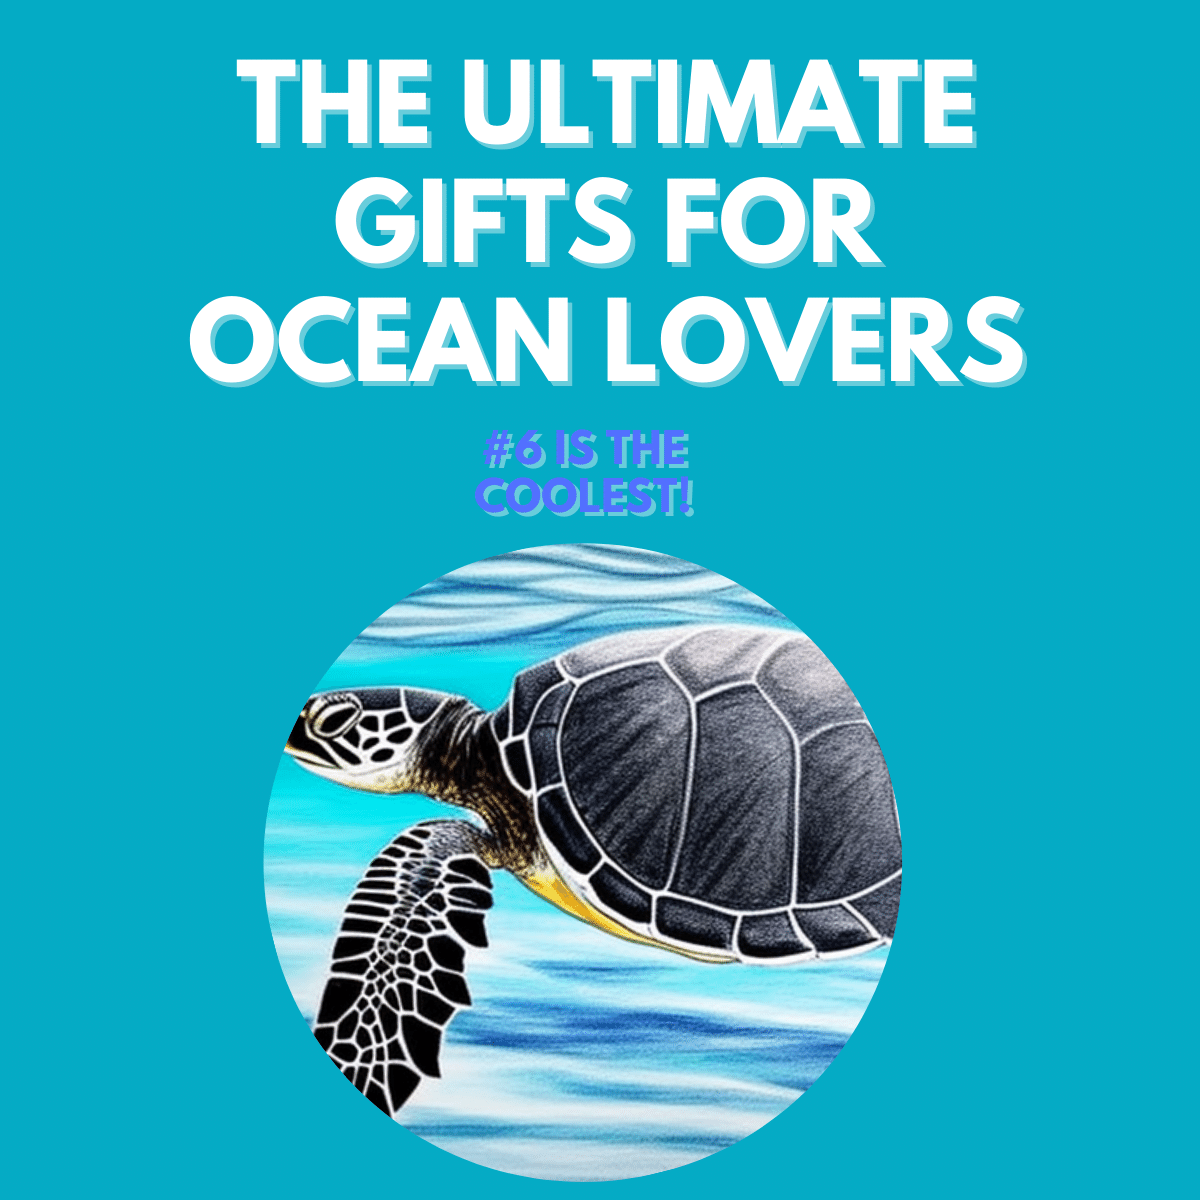 The Ultimate Gifts for Ocean Lovers - number 6 is the Coolest!